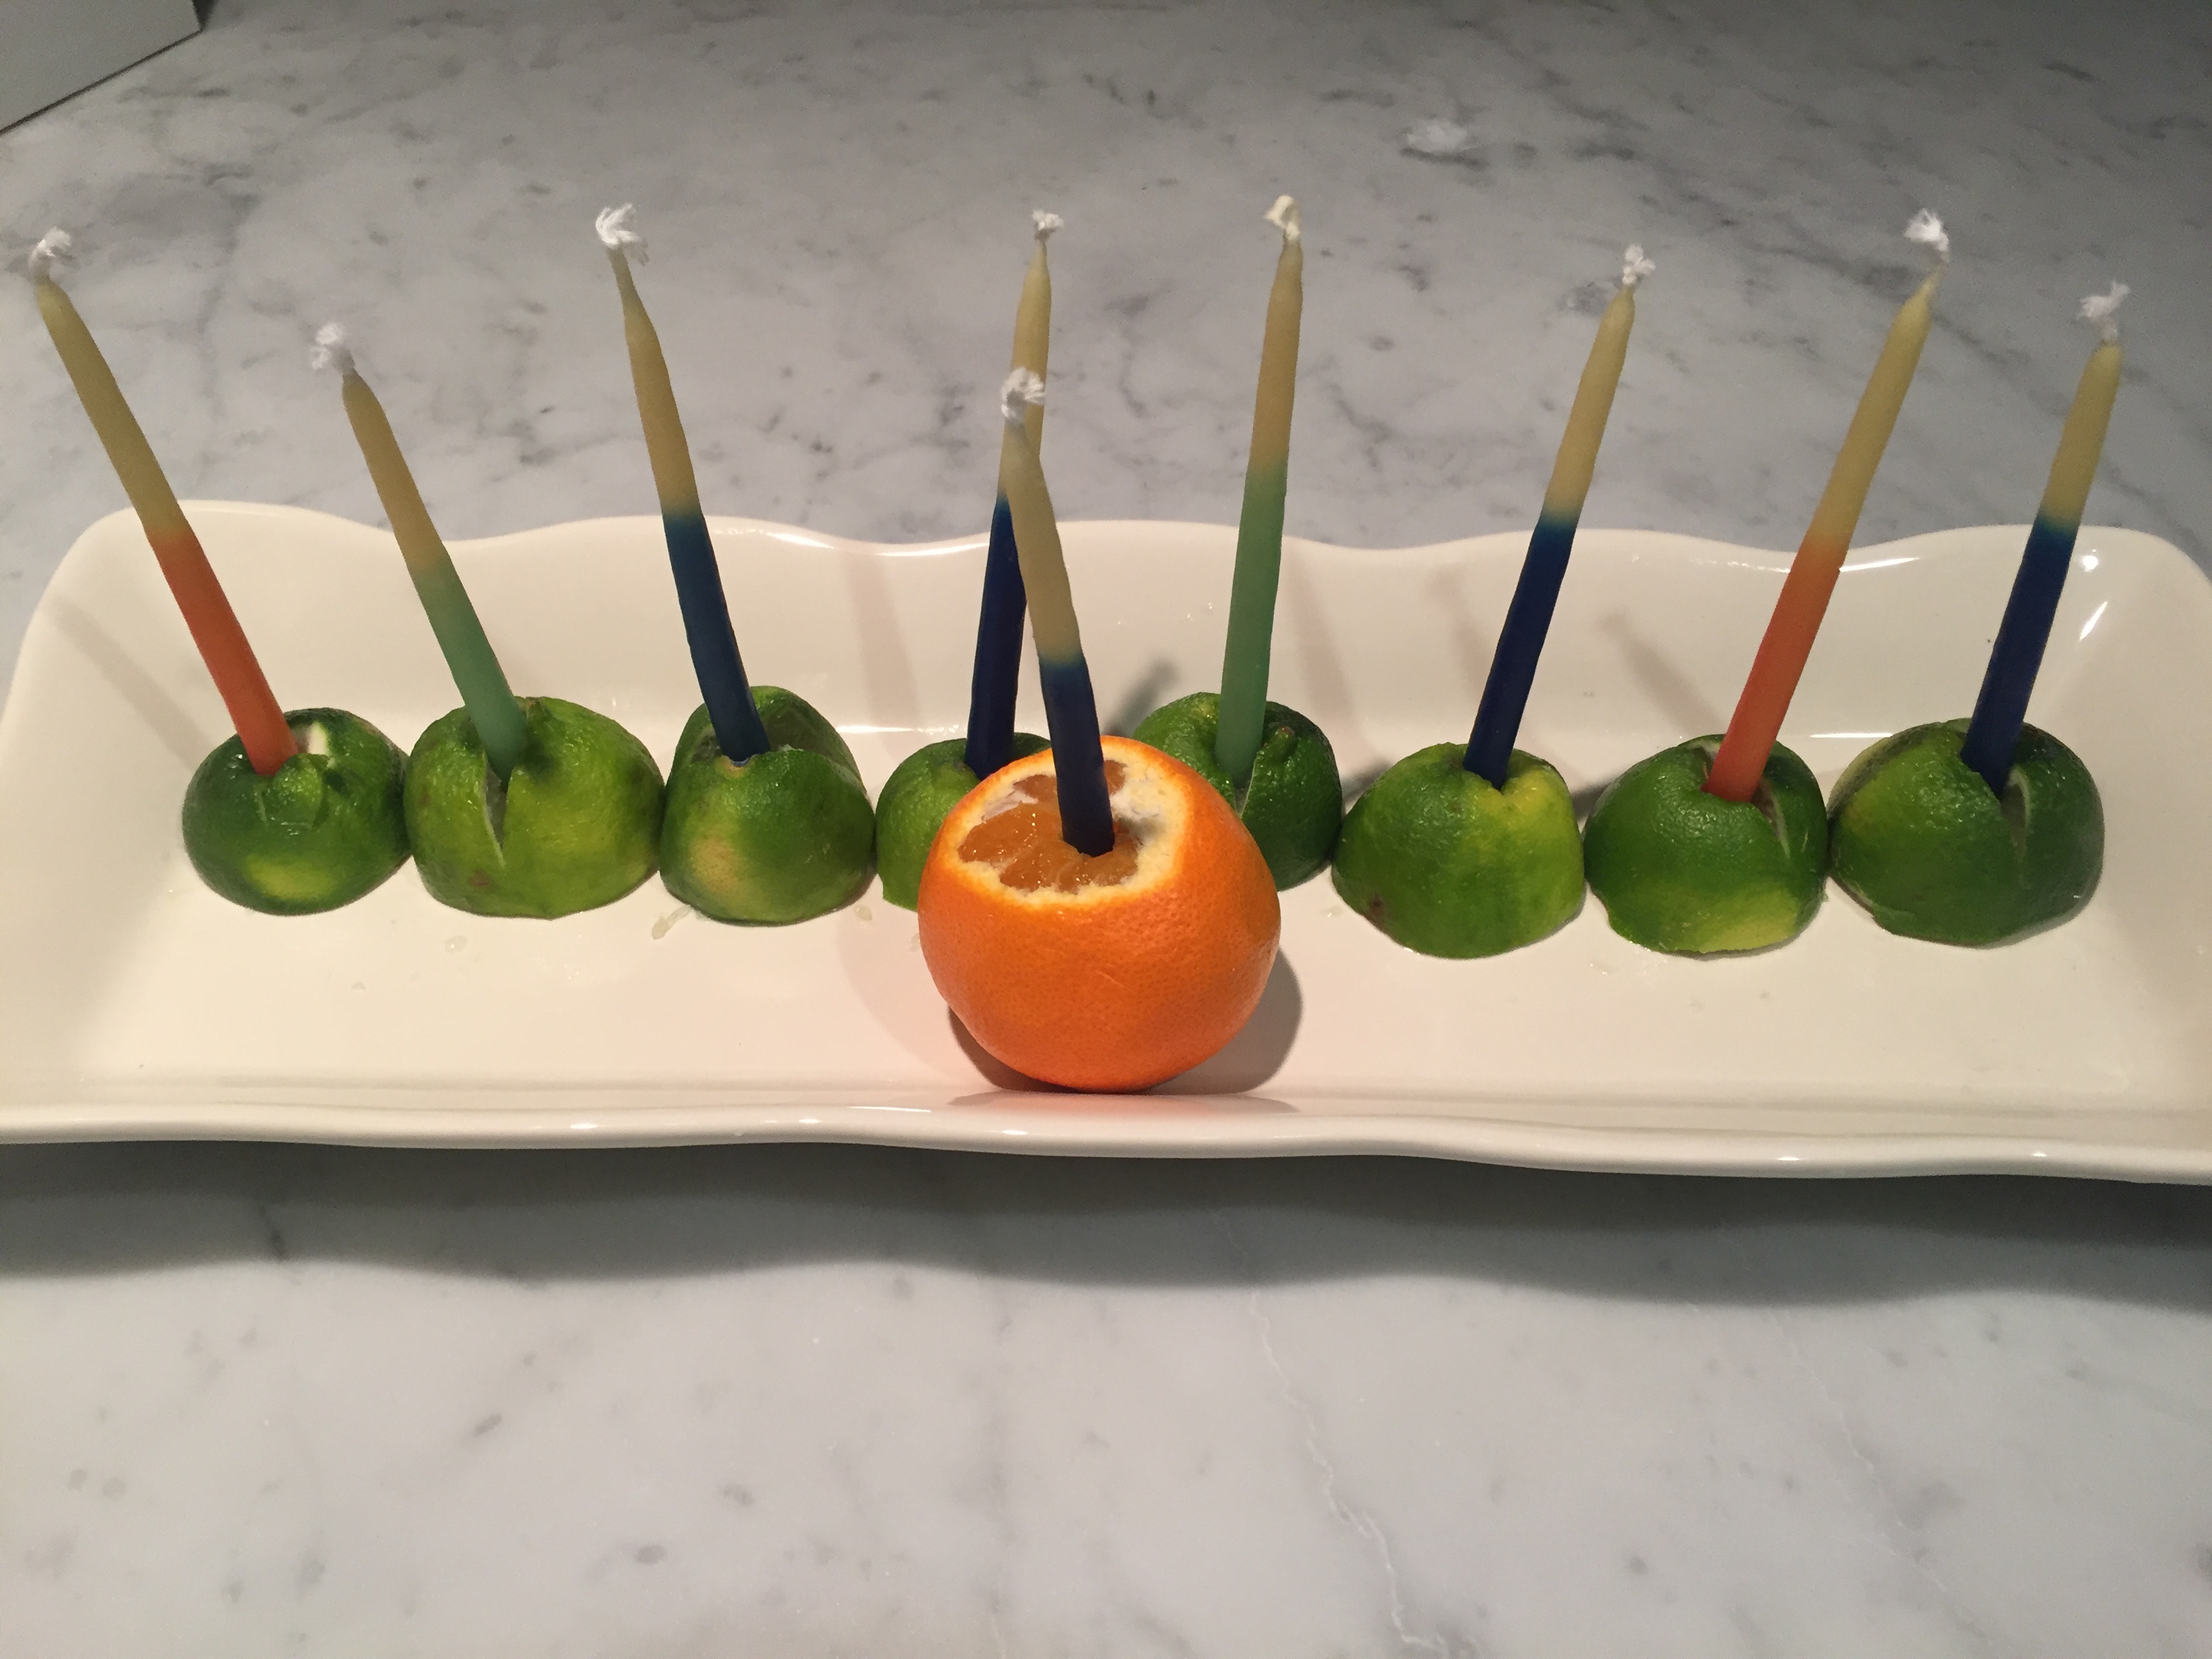 Use/Re-use items in your house for holiday decor - a fruit filled Hanukkah menorah